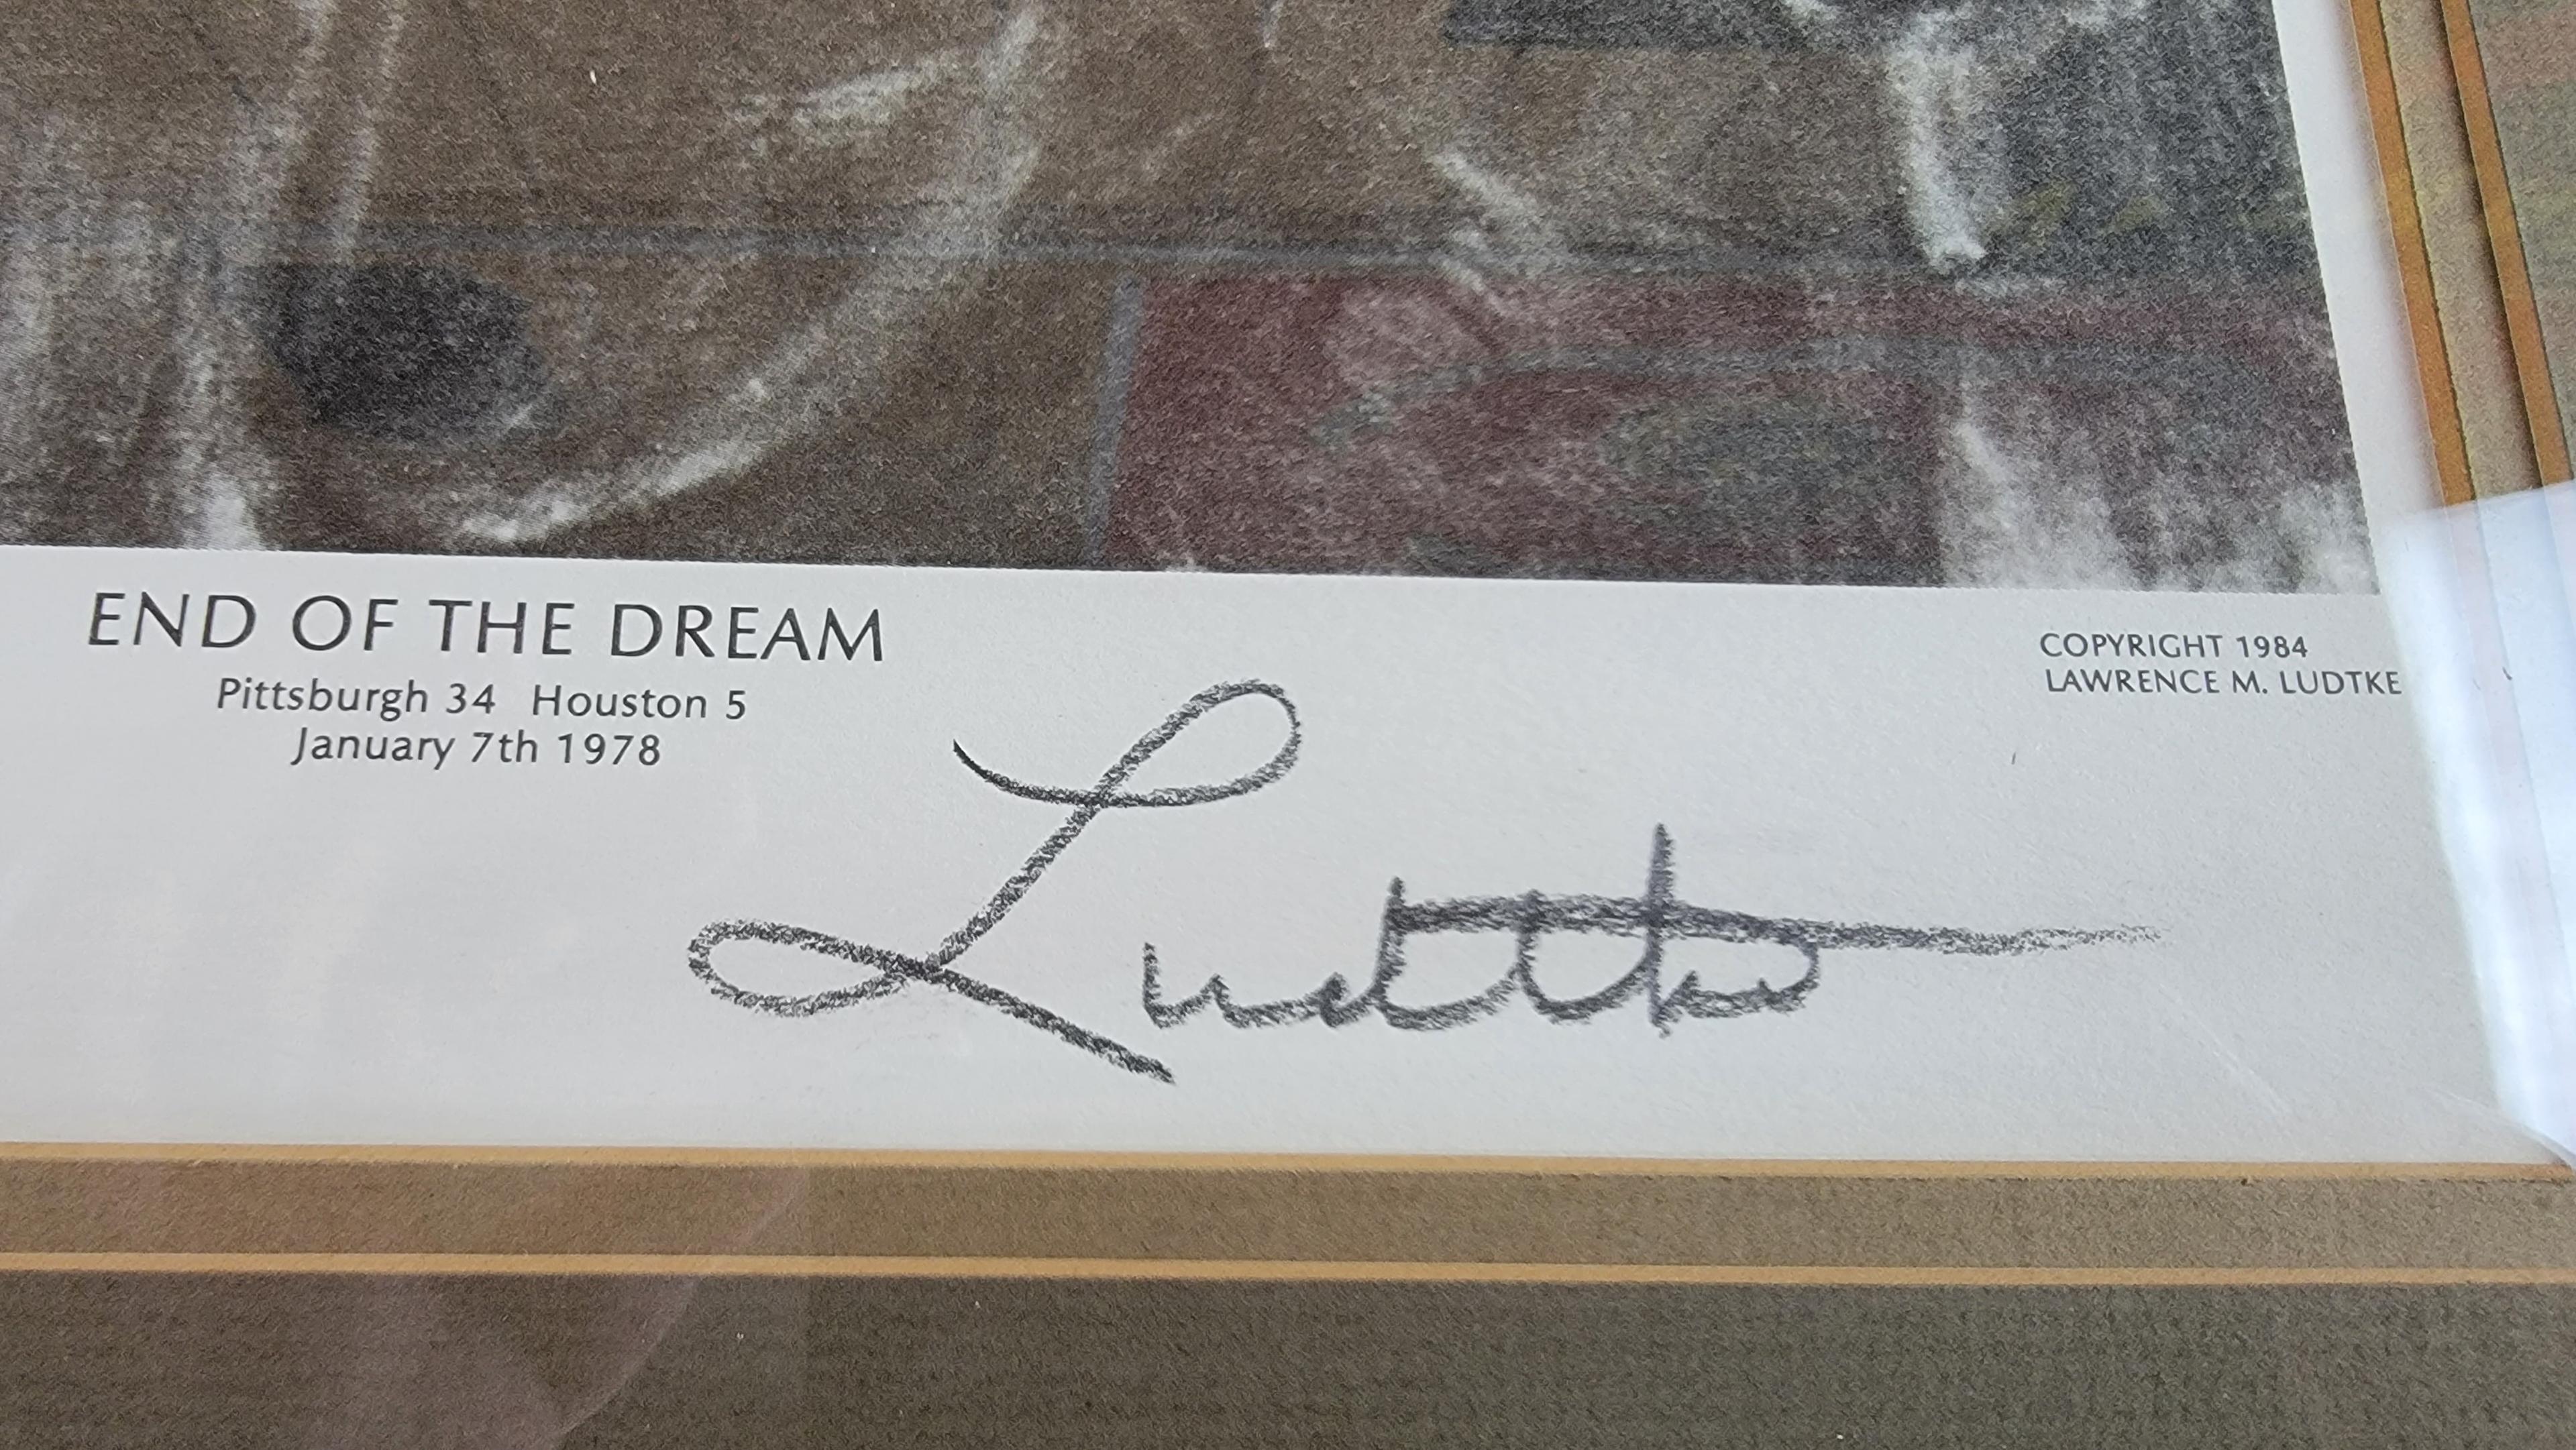 6/100 LIMITED PRINT - "END OF THE DREAM" LAWRENCE M. LUDTKE